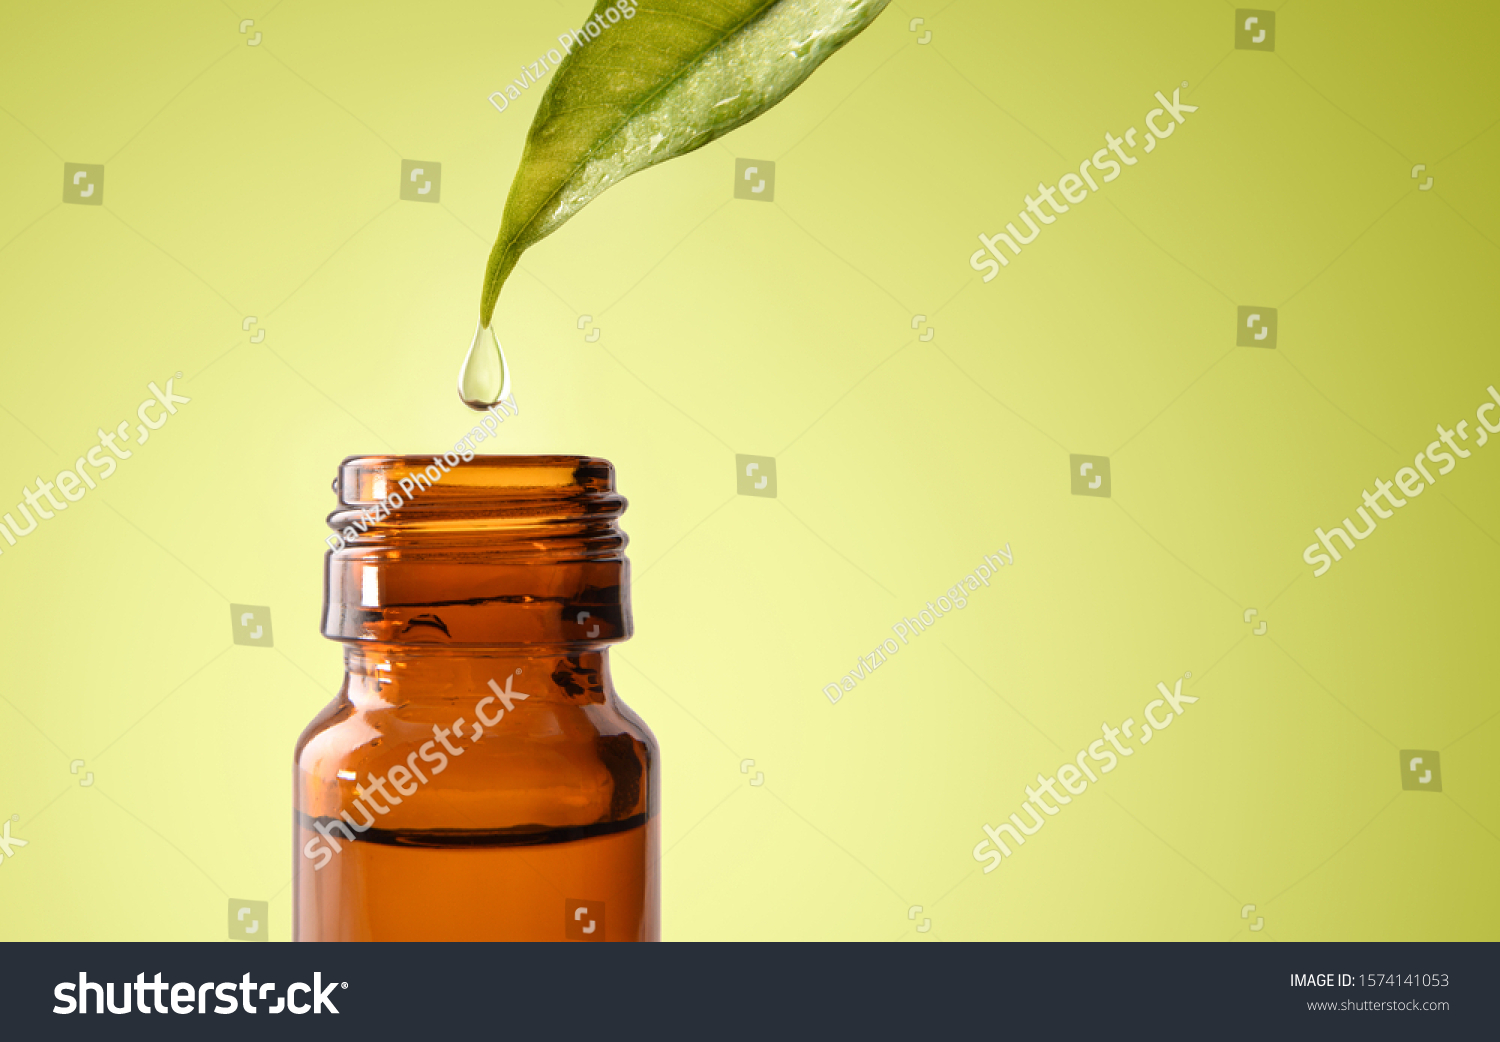 Natural medicine concept with leaf and drop falling into glass jar with medicinal liquid and green gradient background. Horizontal composition. Front view. #1574141053